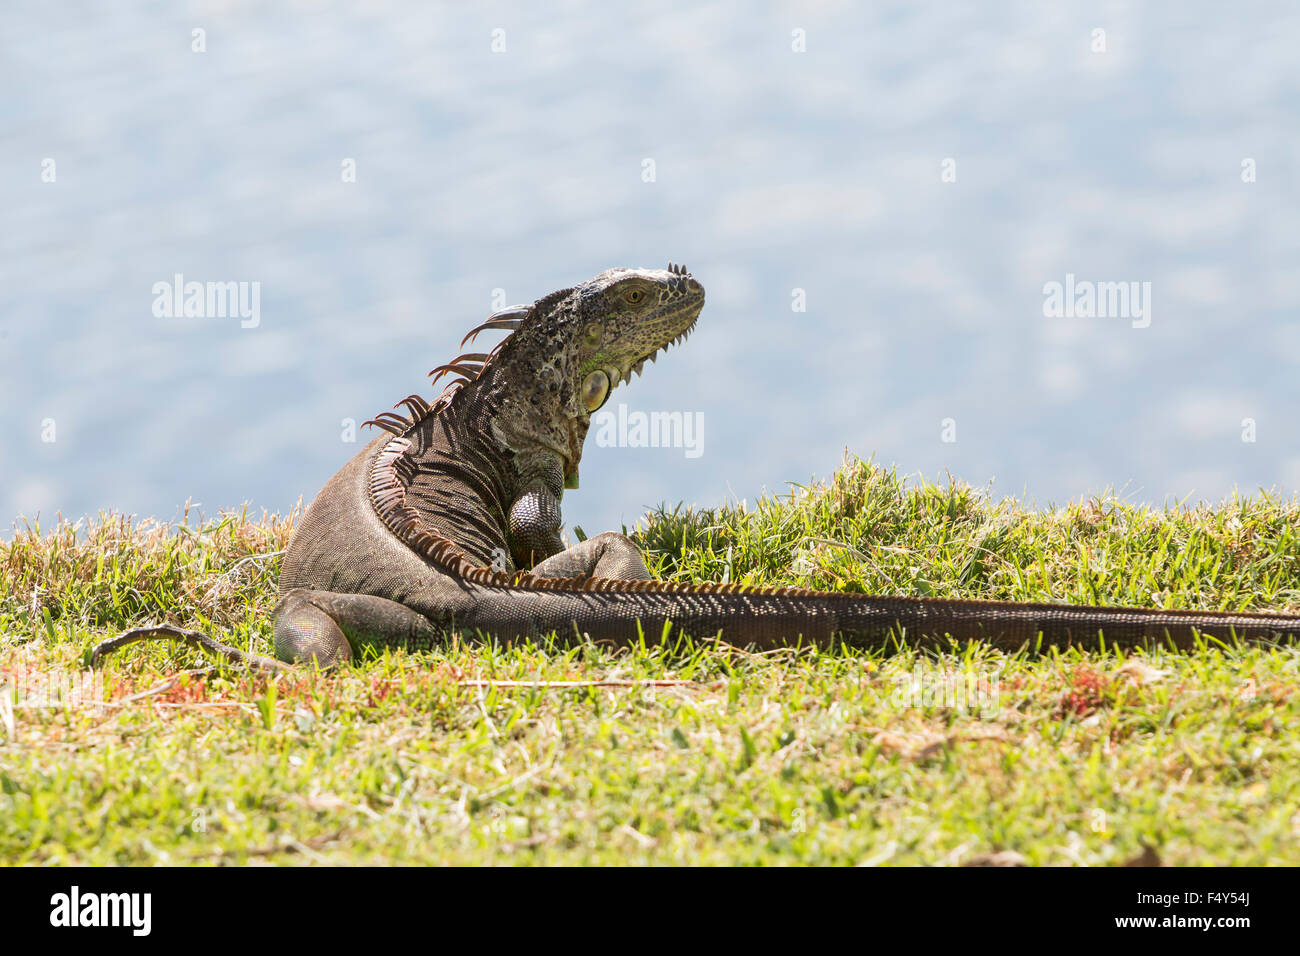 Iguana in the meadow. View from behind. Florida. Stock Photo